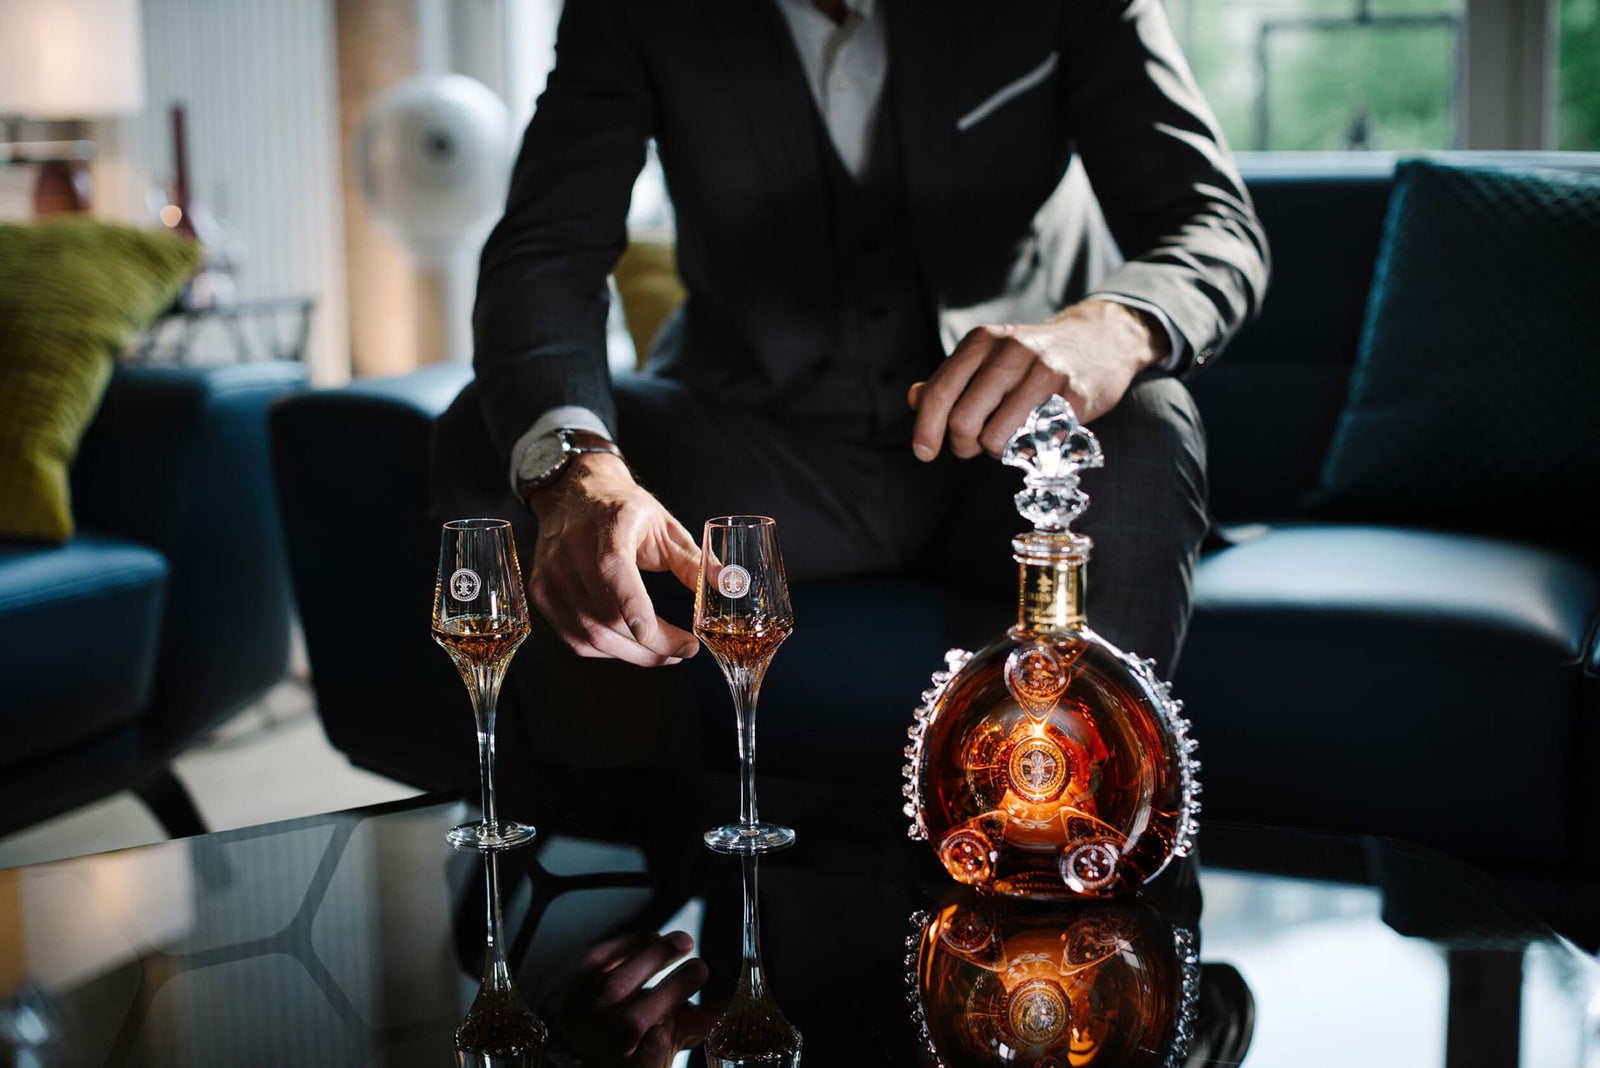 A lifestyle image of a man reaching for LOUIS XIII crystal glass, another glass and a decanter on the table